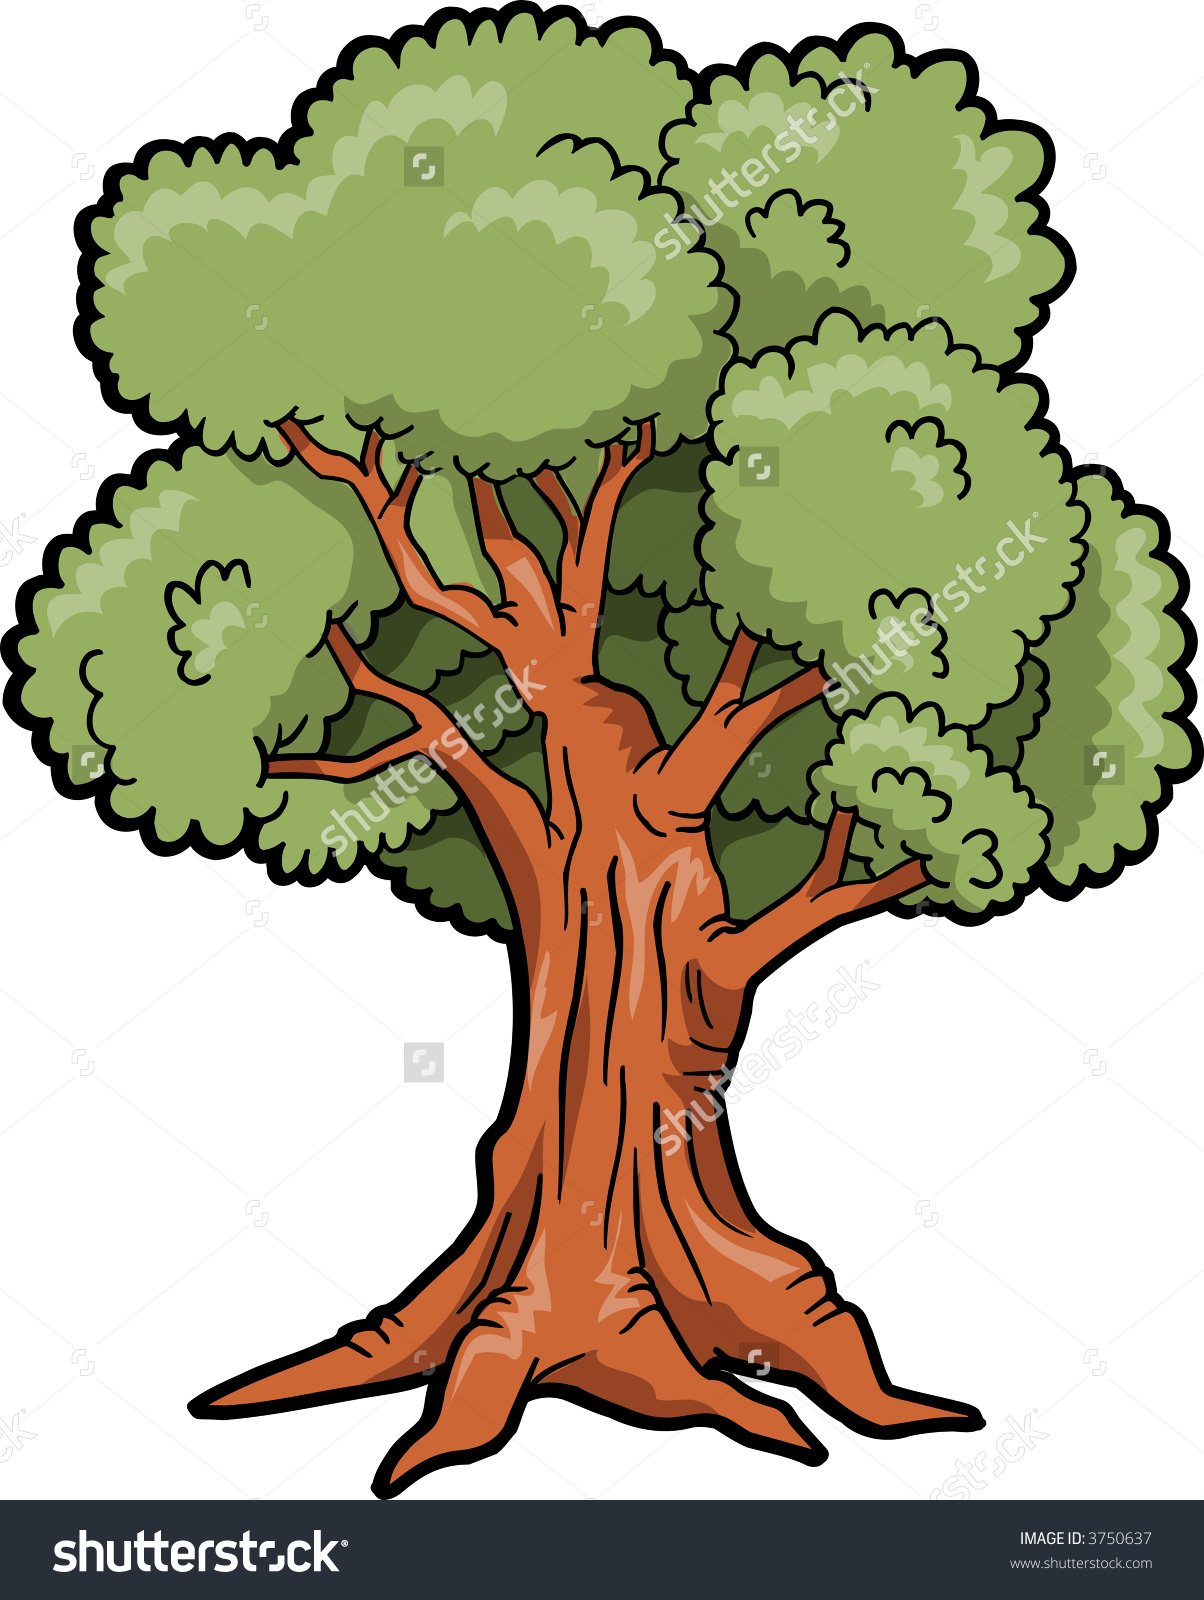 Giant tree clipart.